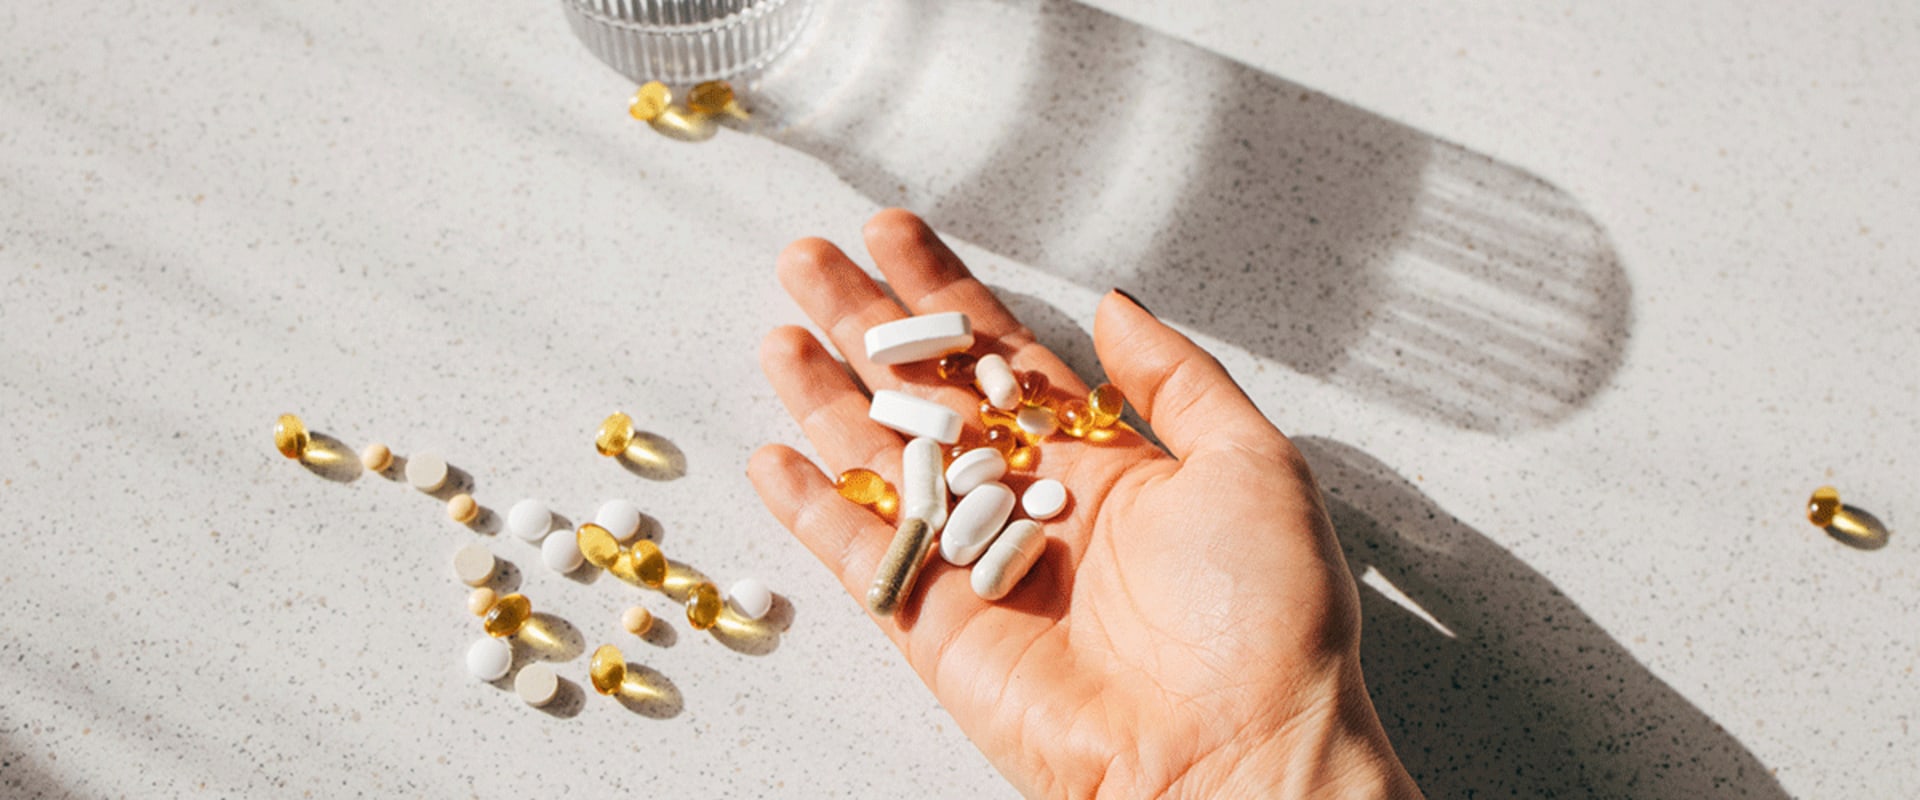 How long does it take for supplements to start working in the body?